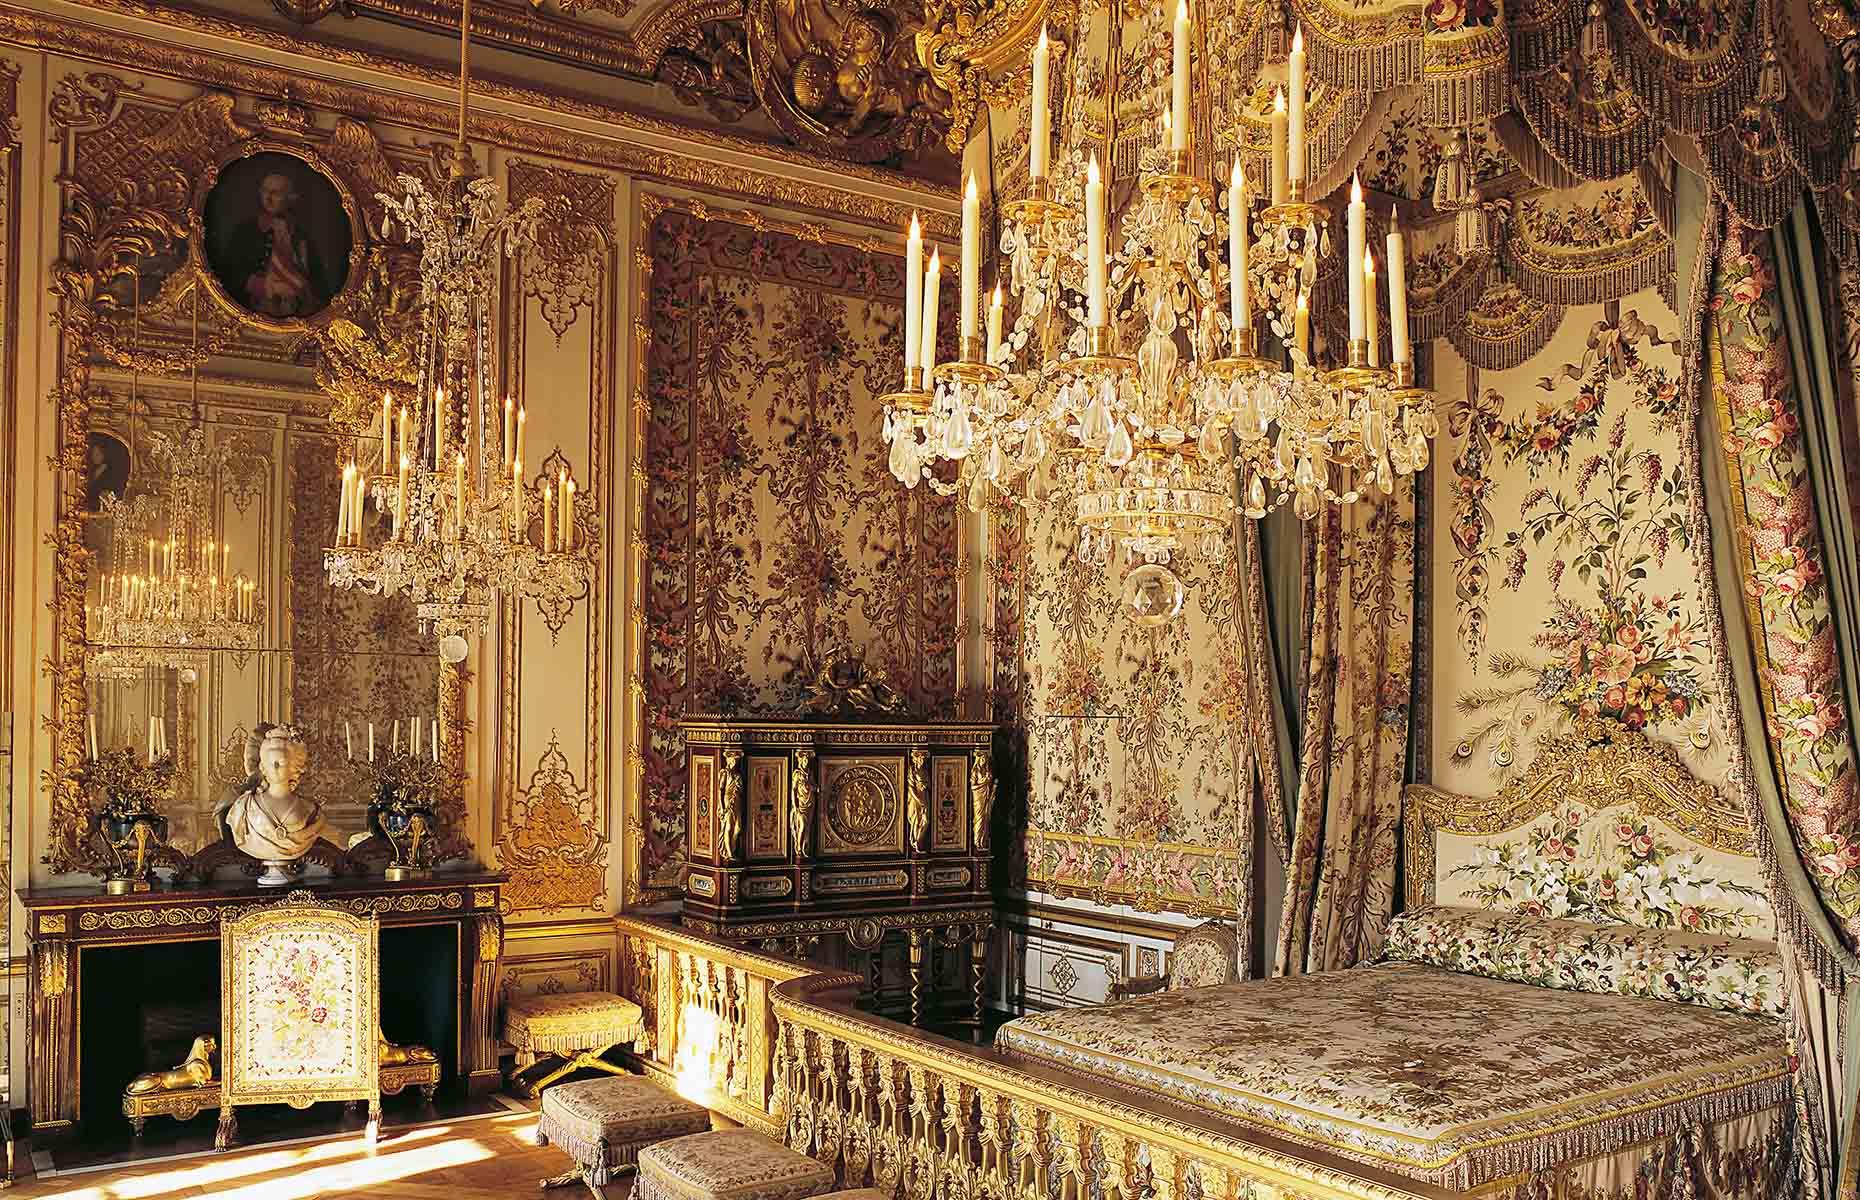 <p>Marie Antoinette spent a considerable amount of time and money on decorating – and redecorating – her various apartments within the palace. </p>  <p>She enjoyed assigning elaborate themes and color schemes to her rooms that would encompass the walls, ceilings, floors, and even the curtains and lighting.</p>  <p>While the rooms she designed retained the grandeur expected of a royal court, Marie Antoinette also added feminine floral accents and elegant wooden boiserie paneling for a feminine finish. </p>  <p>Pictured is one of the queen's lavish gilded chambers within Versailles.</p>